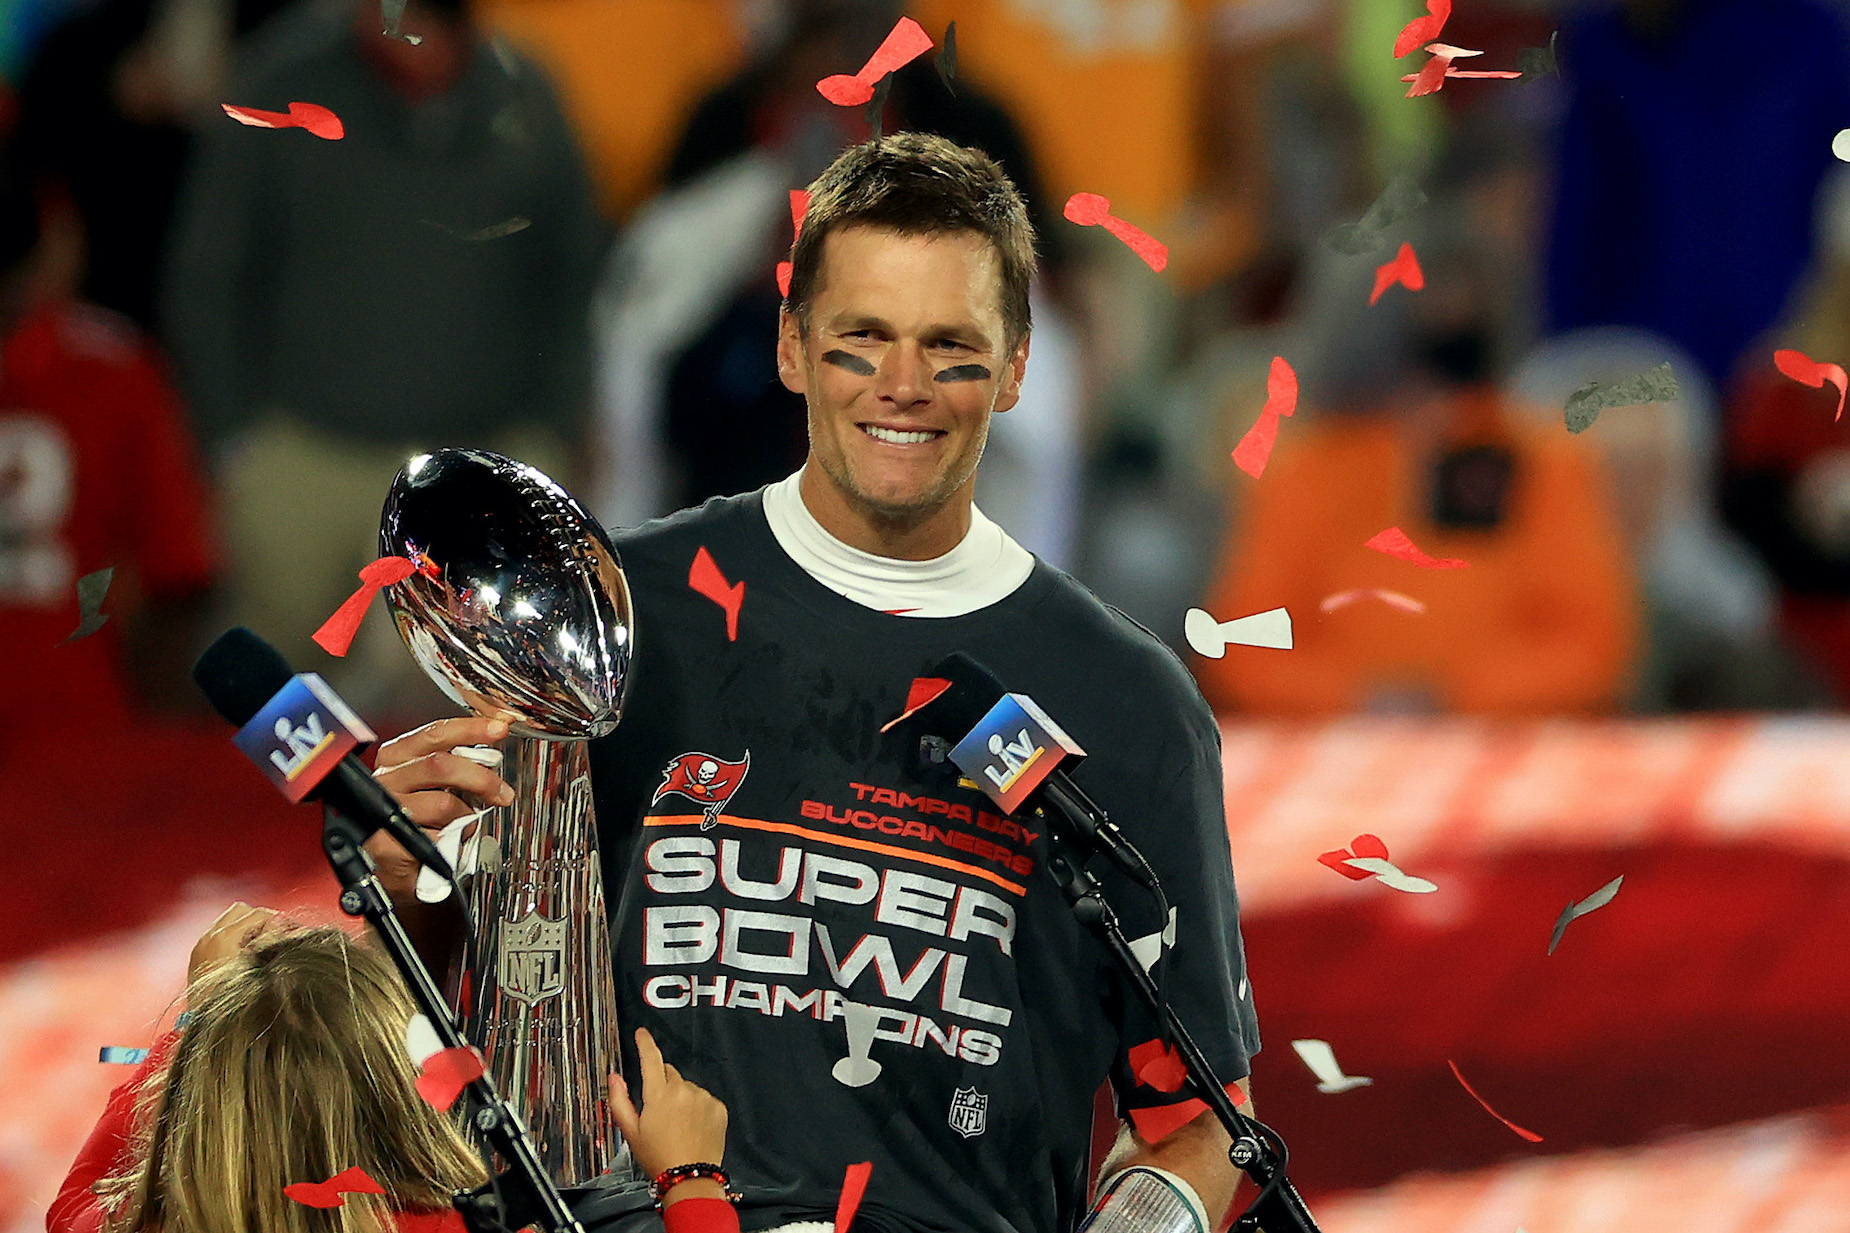 Tom Brady receives the Lombardi Trophy after the Tampa Bay Buccaneers claimed victory in Super Bowl 55.